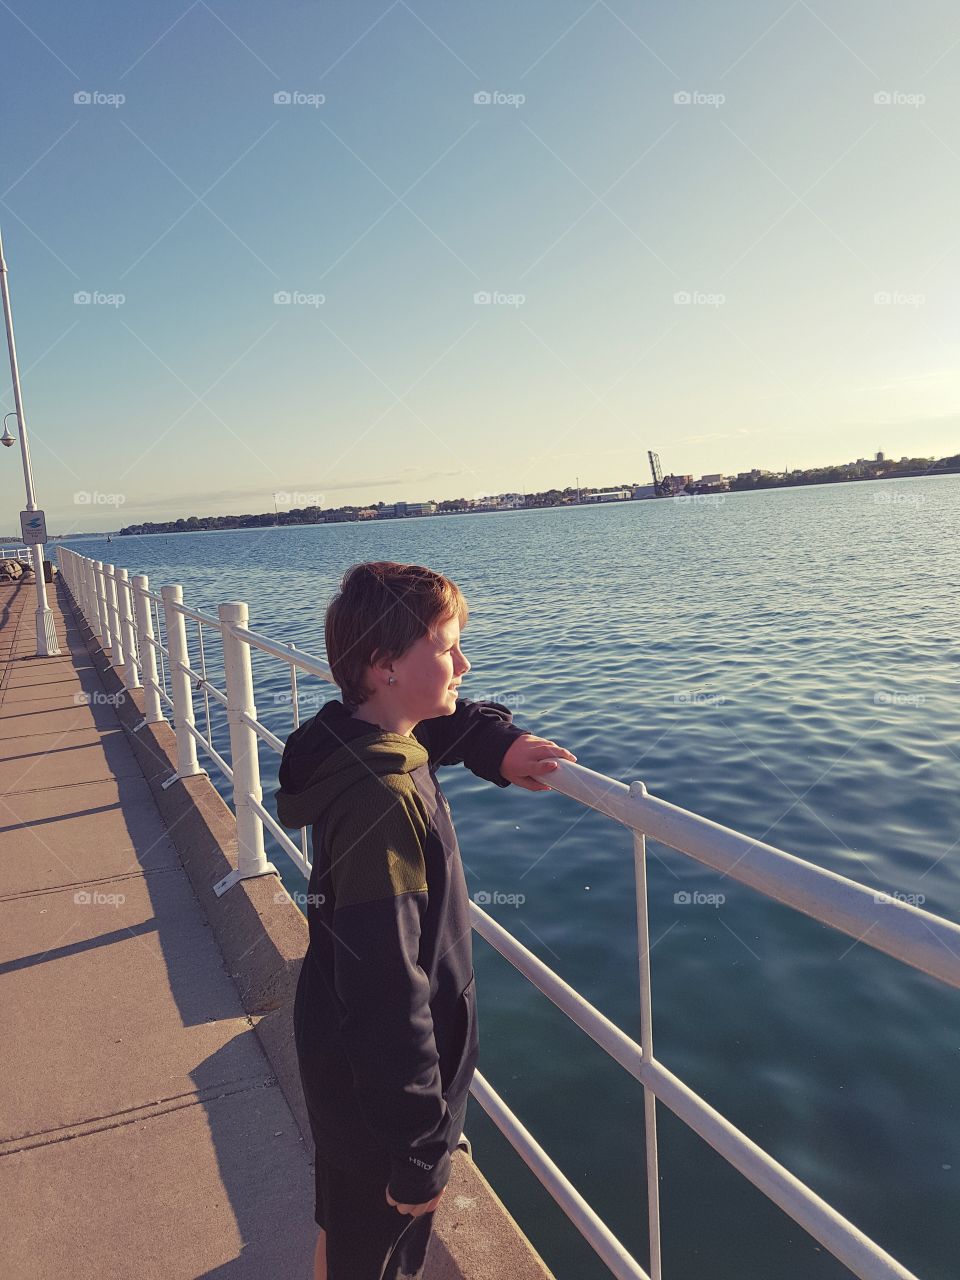 A younge boy looks out on to the water as the sun sets.